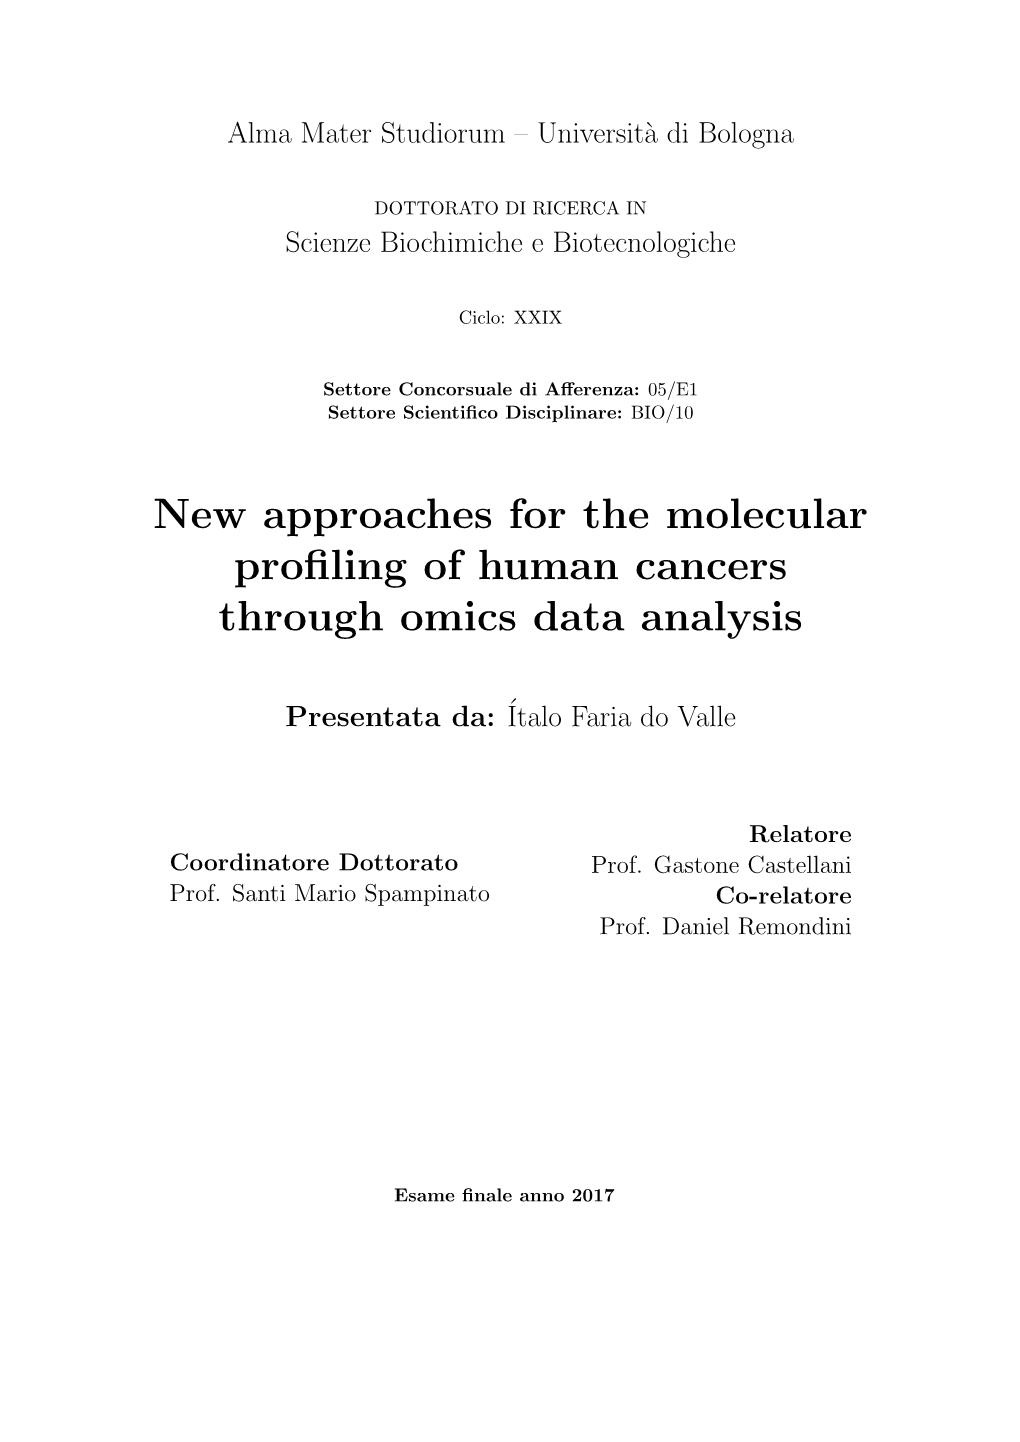 New Approaches for the Molecular Profiling of Human Cancers Through